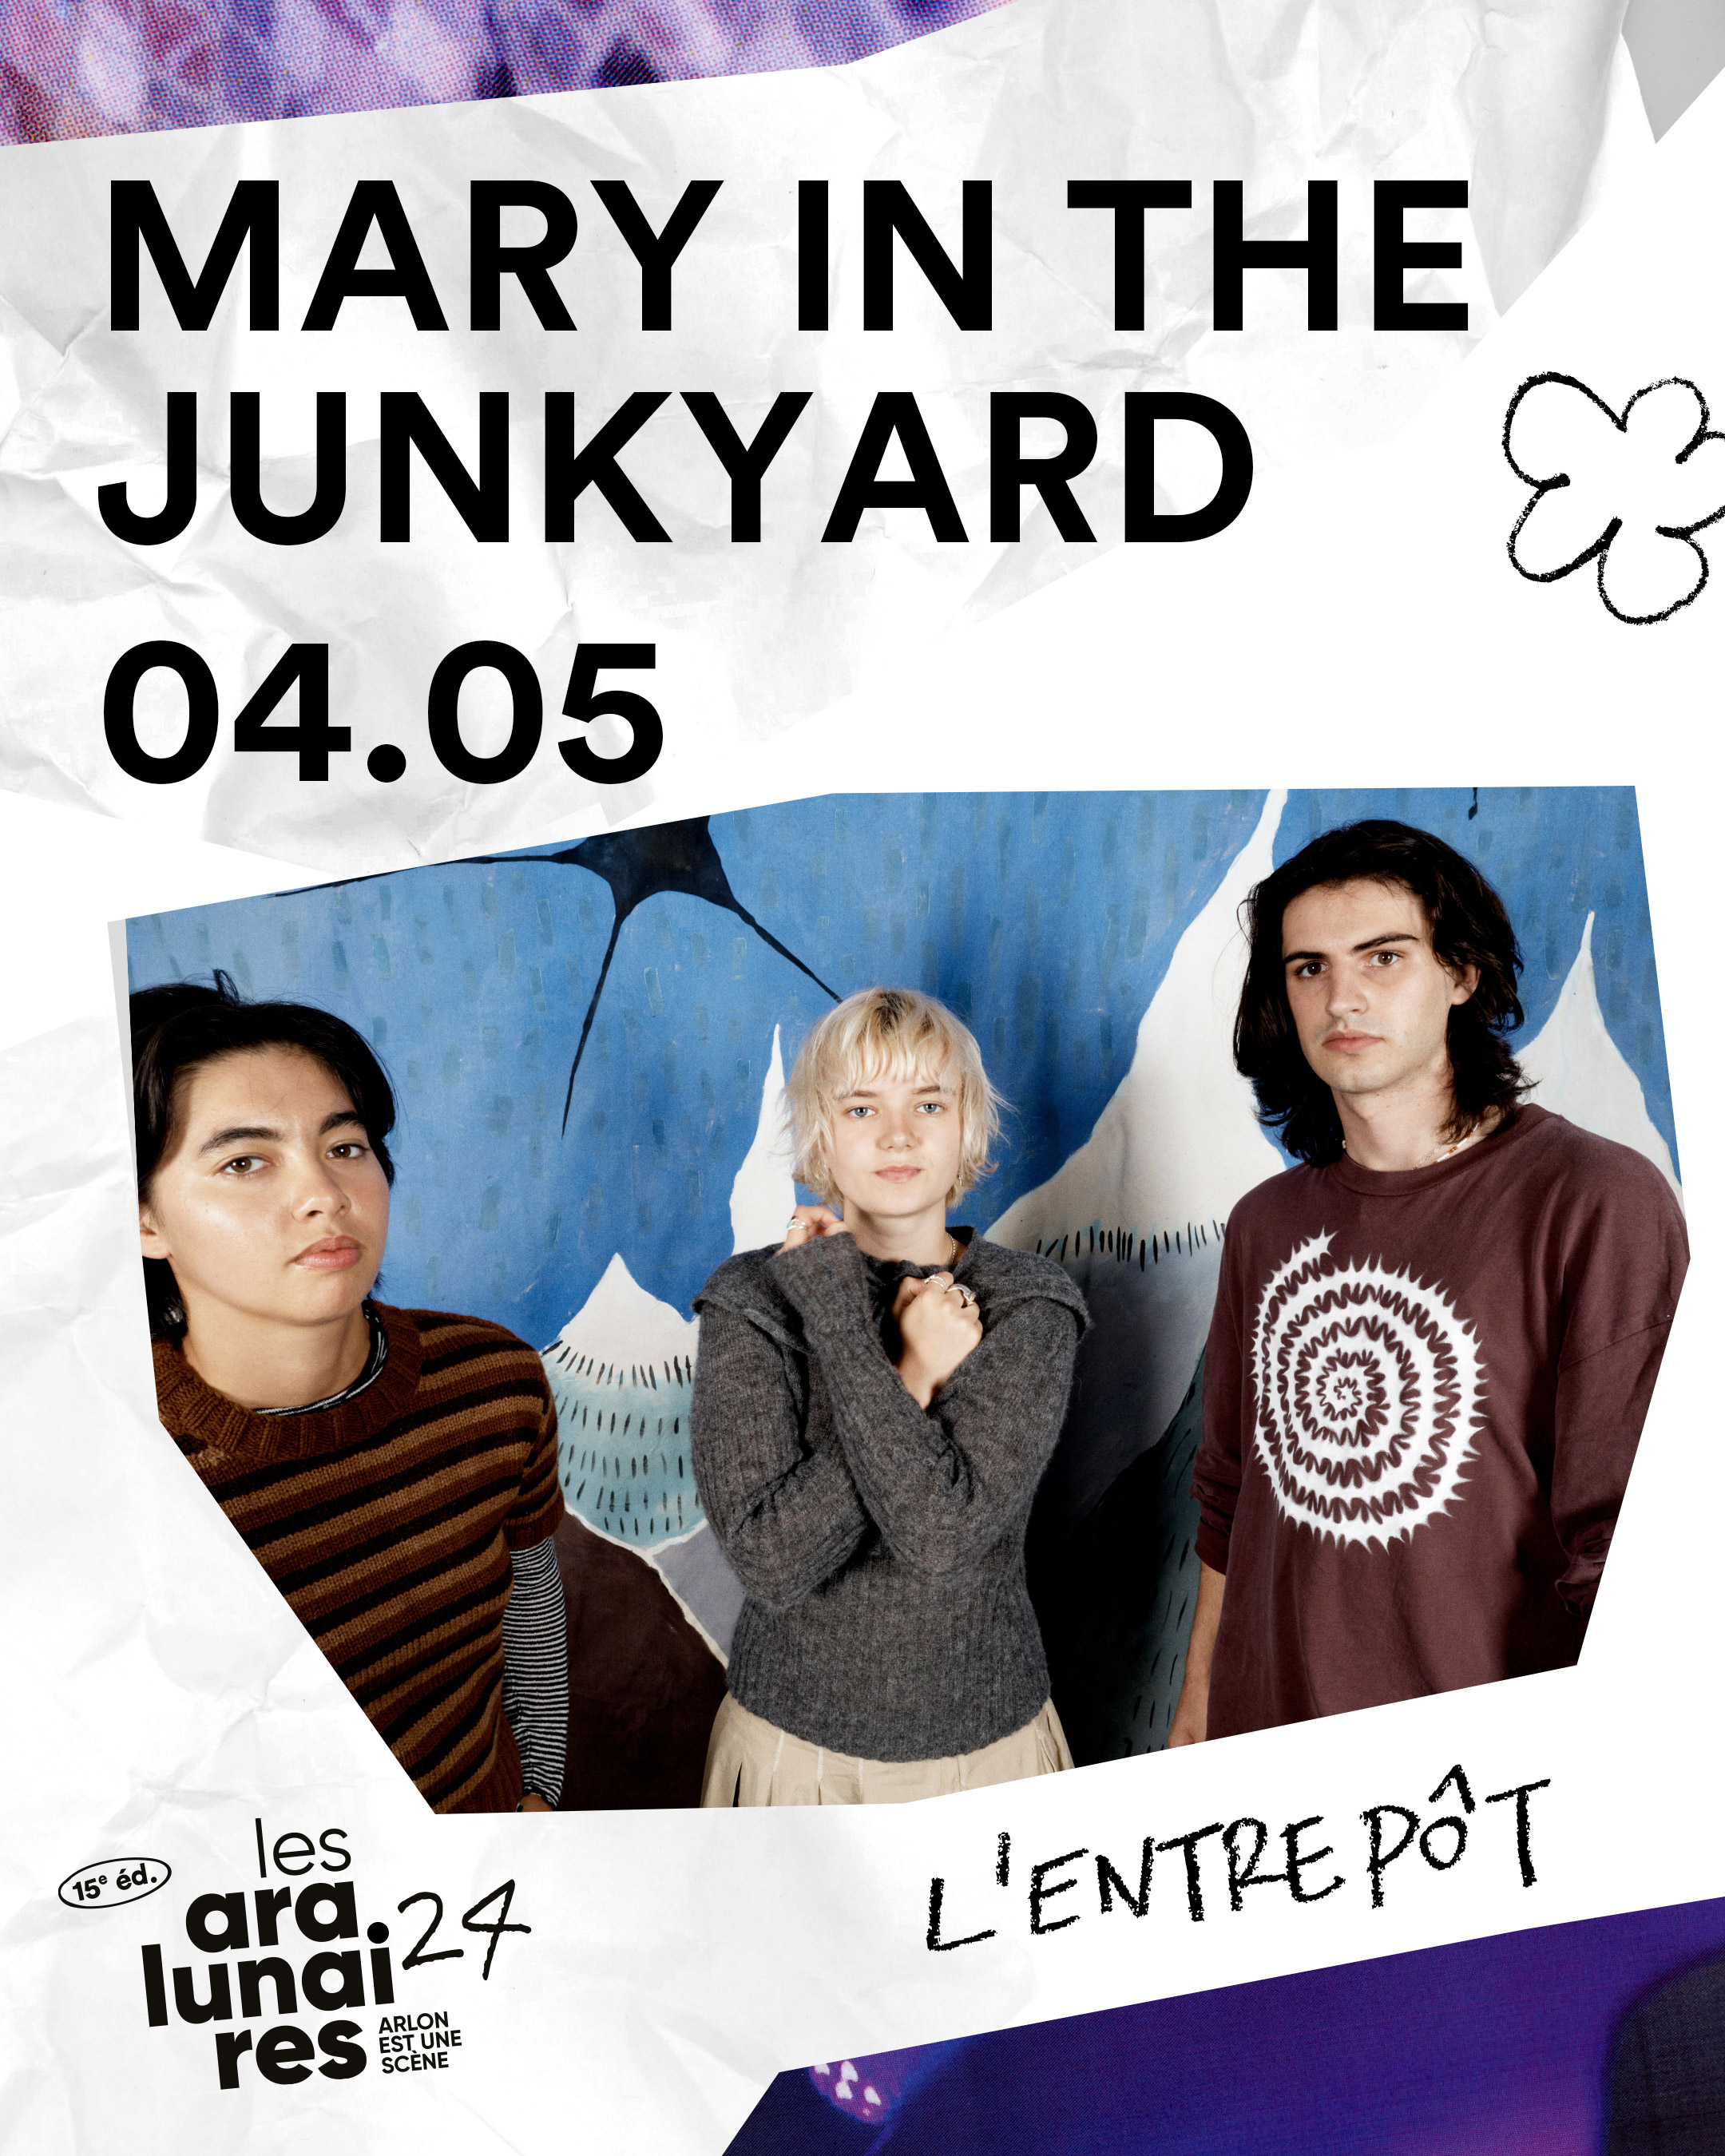 Mary in the junkyard, Use Knife, Bwana - Les aralunaires